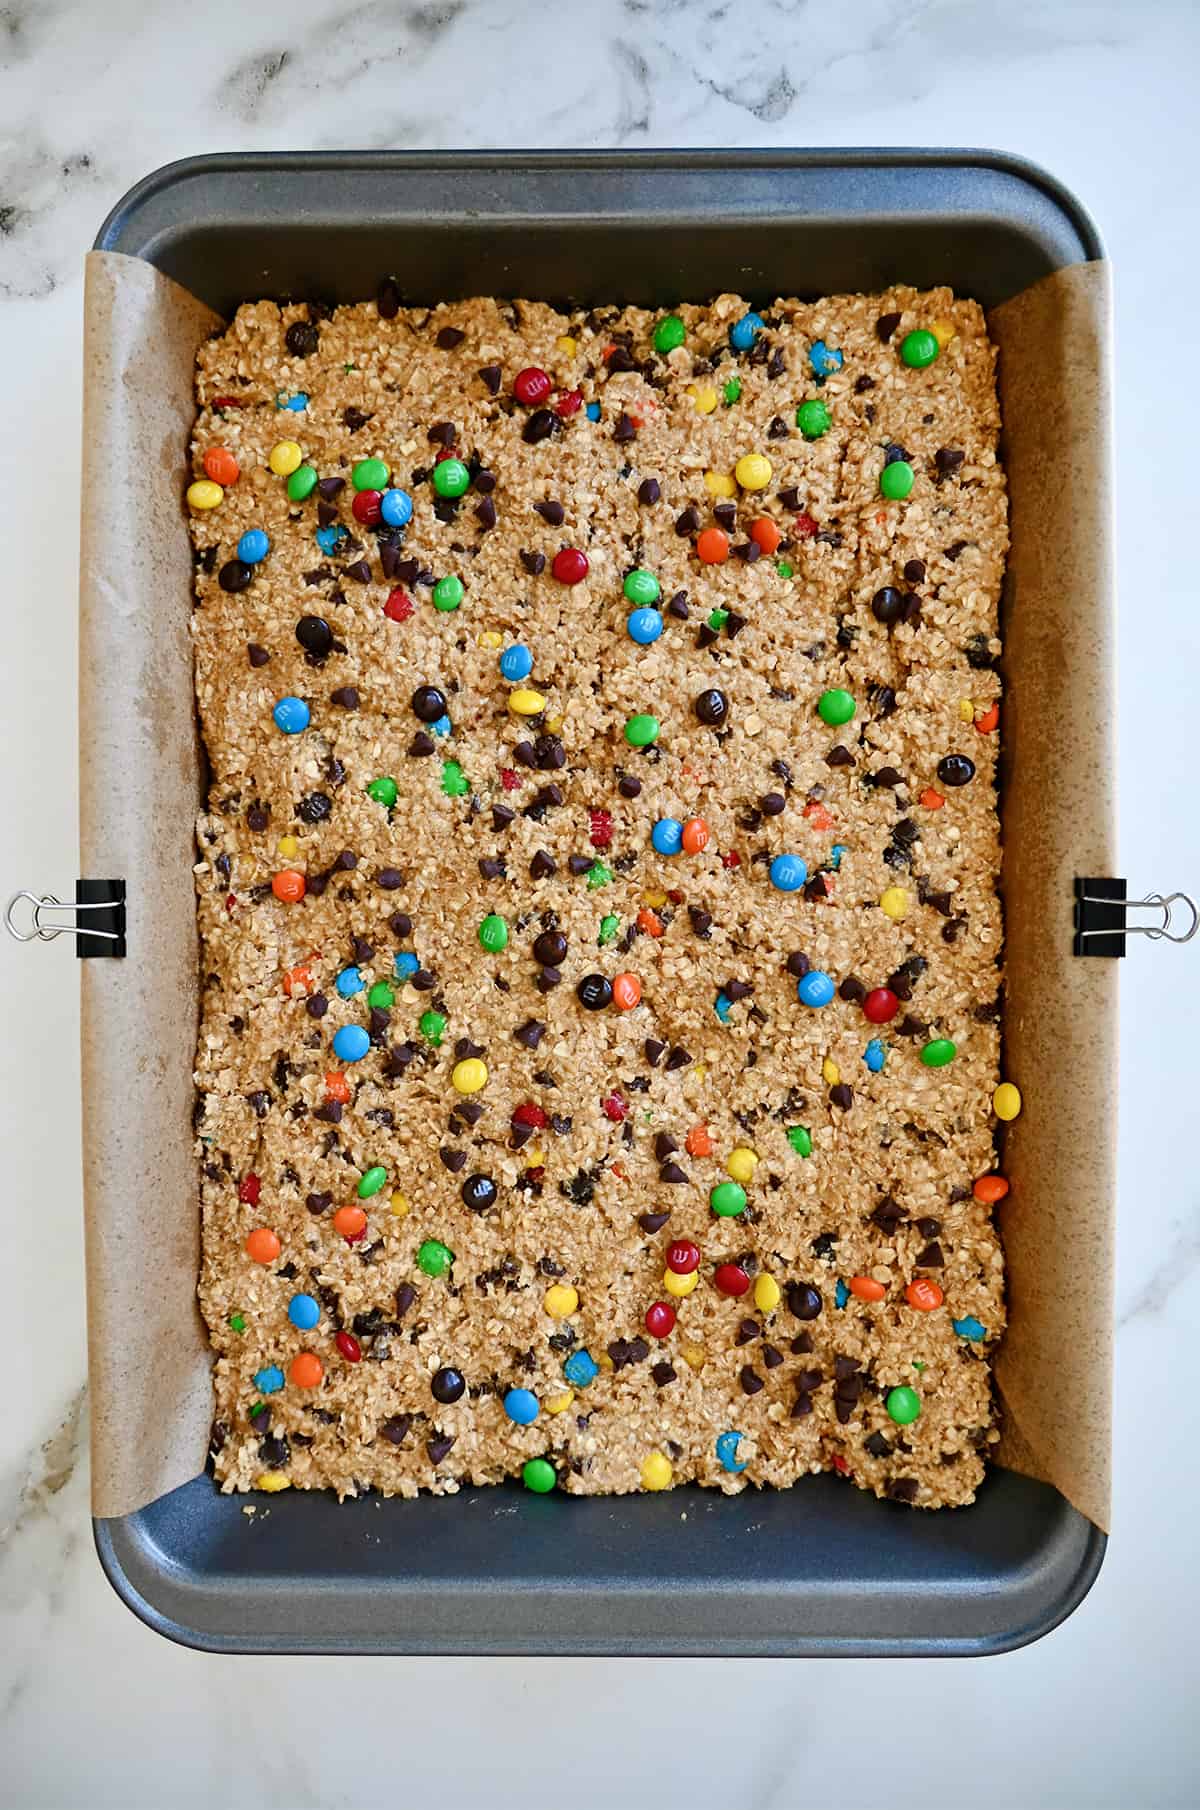 Monster cookie dough spread into an even layer in a 9x13 baking pan lined with parchment paper and secured with metal binder pins.